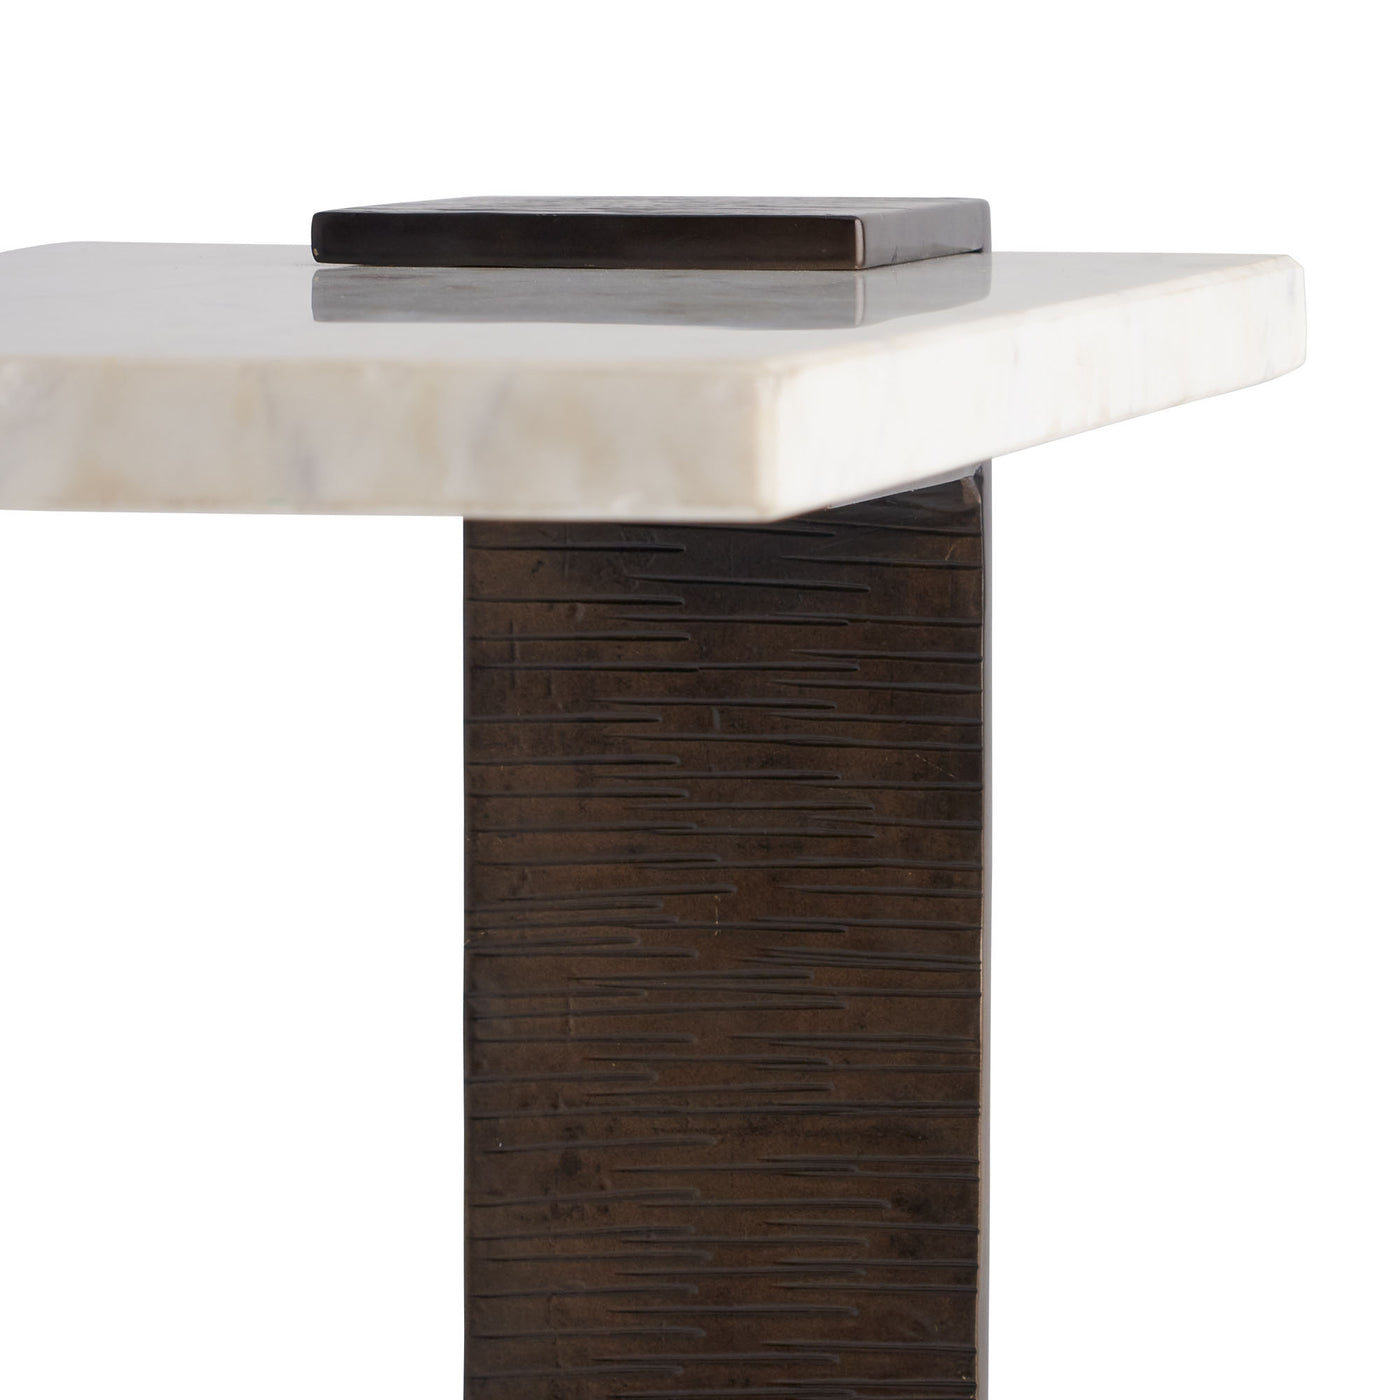 ACCENT TABLE C-SHAPE WHITE MARBLE TOP IRON STAND